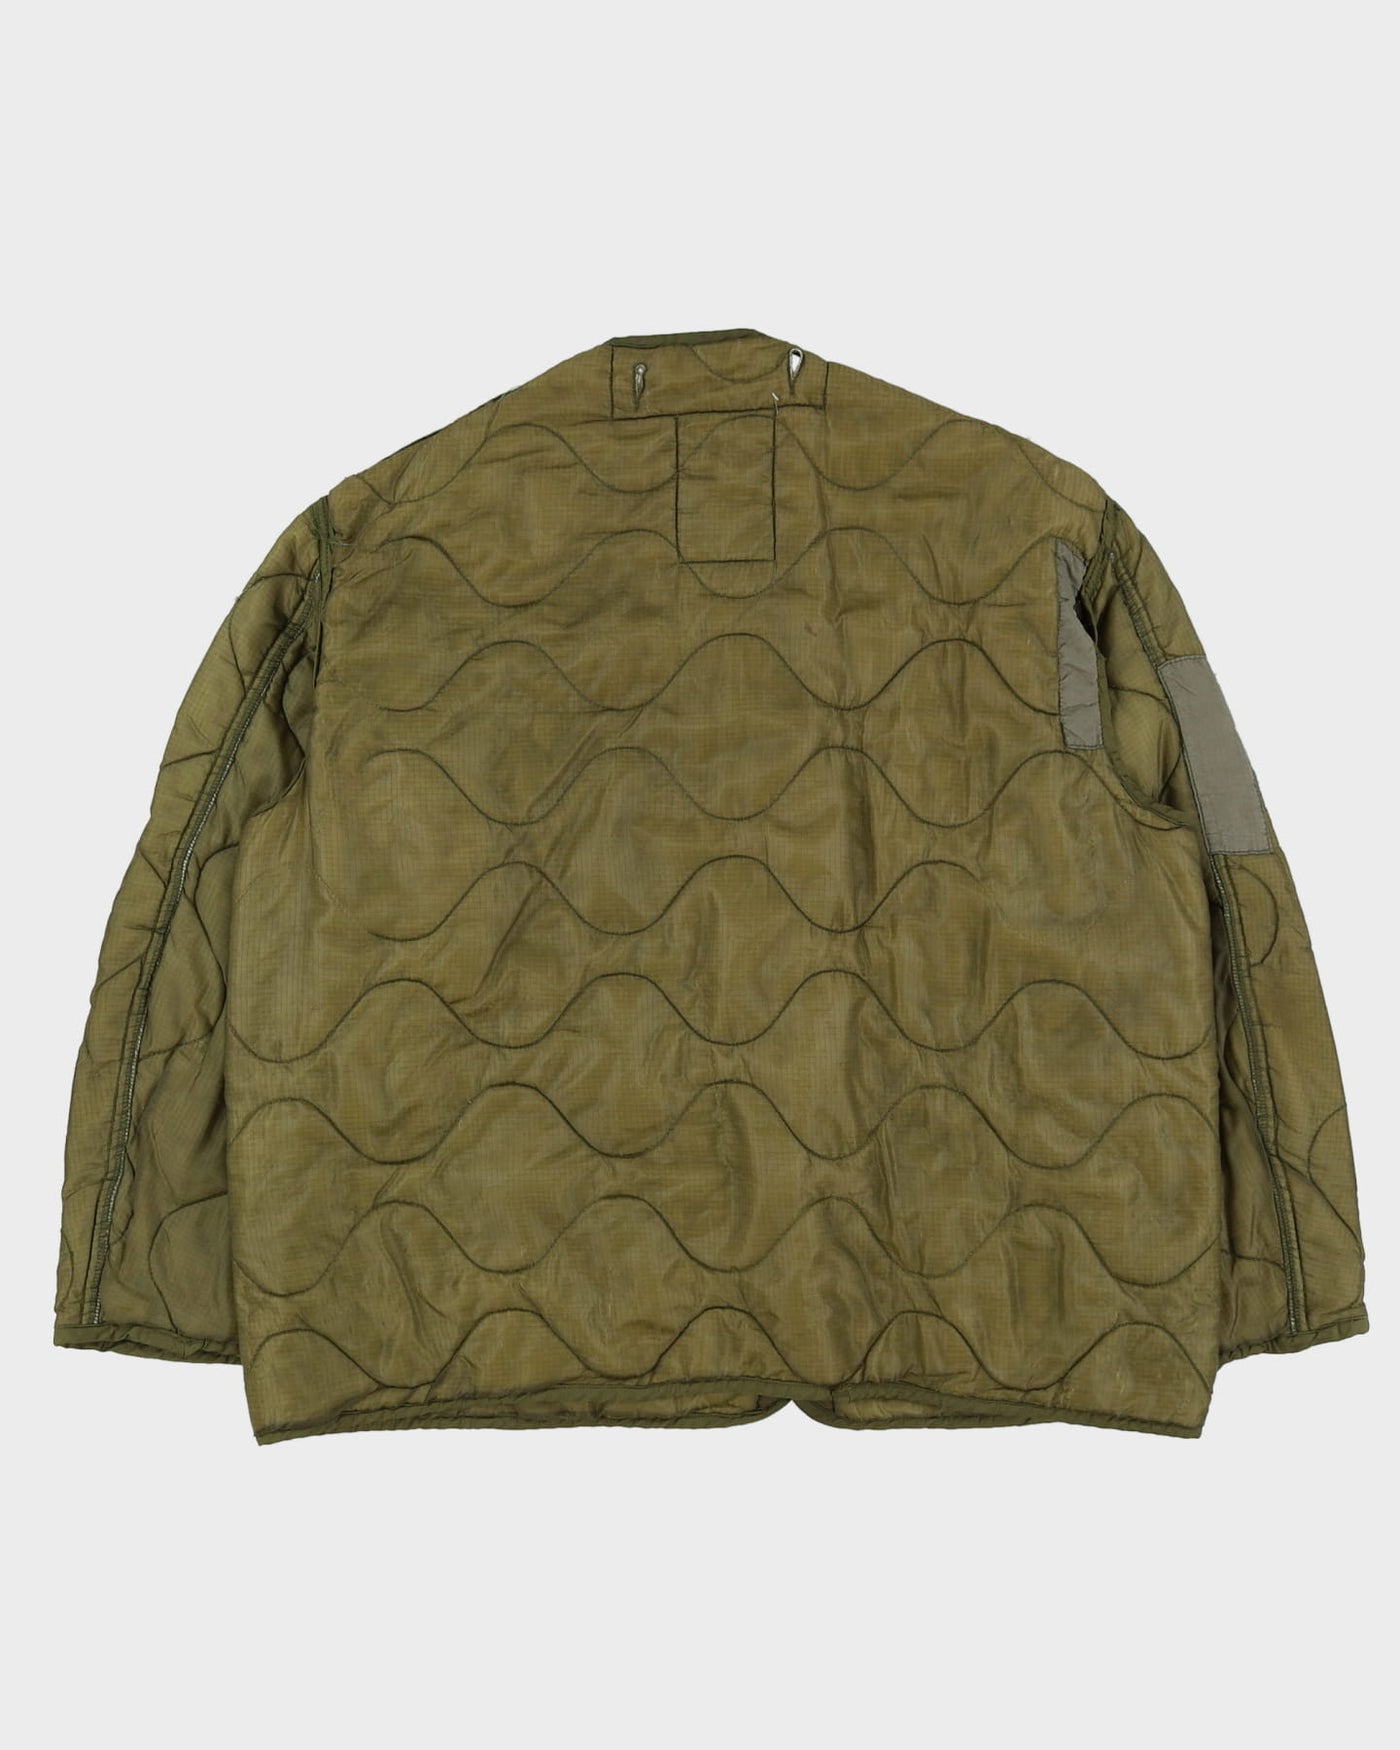 80s Vintage US Army M65 Field Jacket Quilted Liner - Large